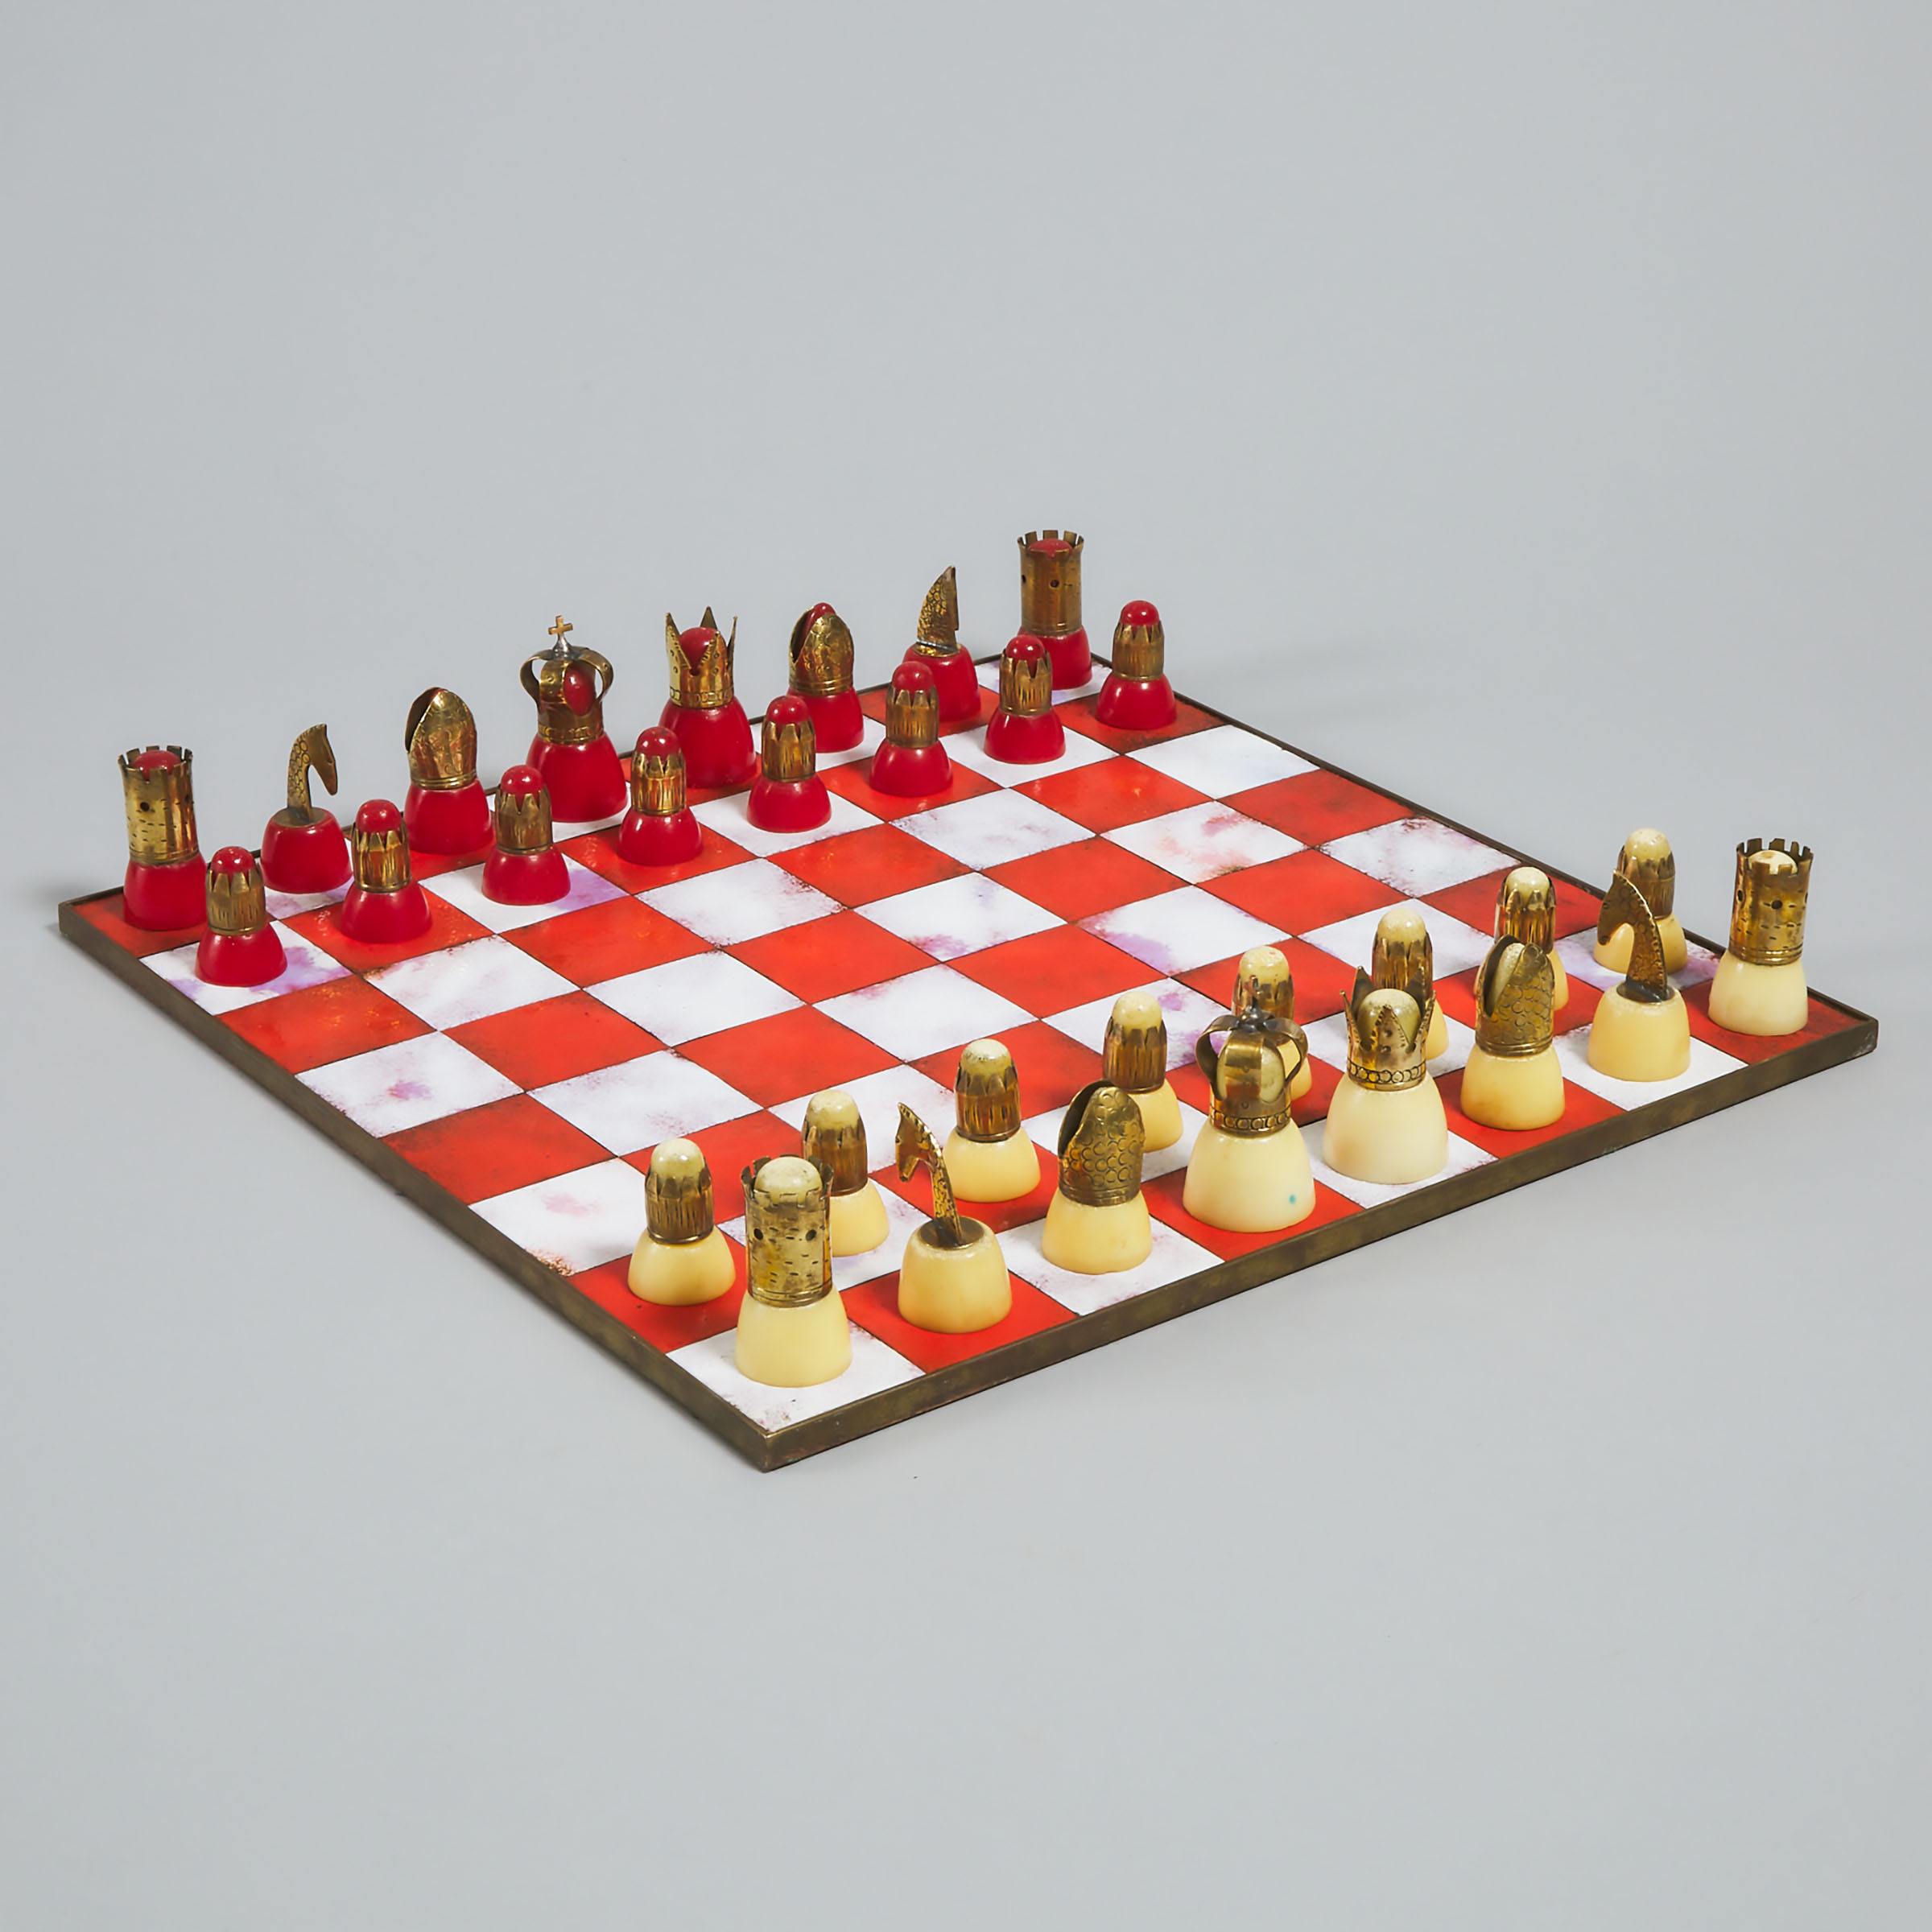 Modernist Hammered Brass and Resin Chess Set, mid 20th century